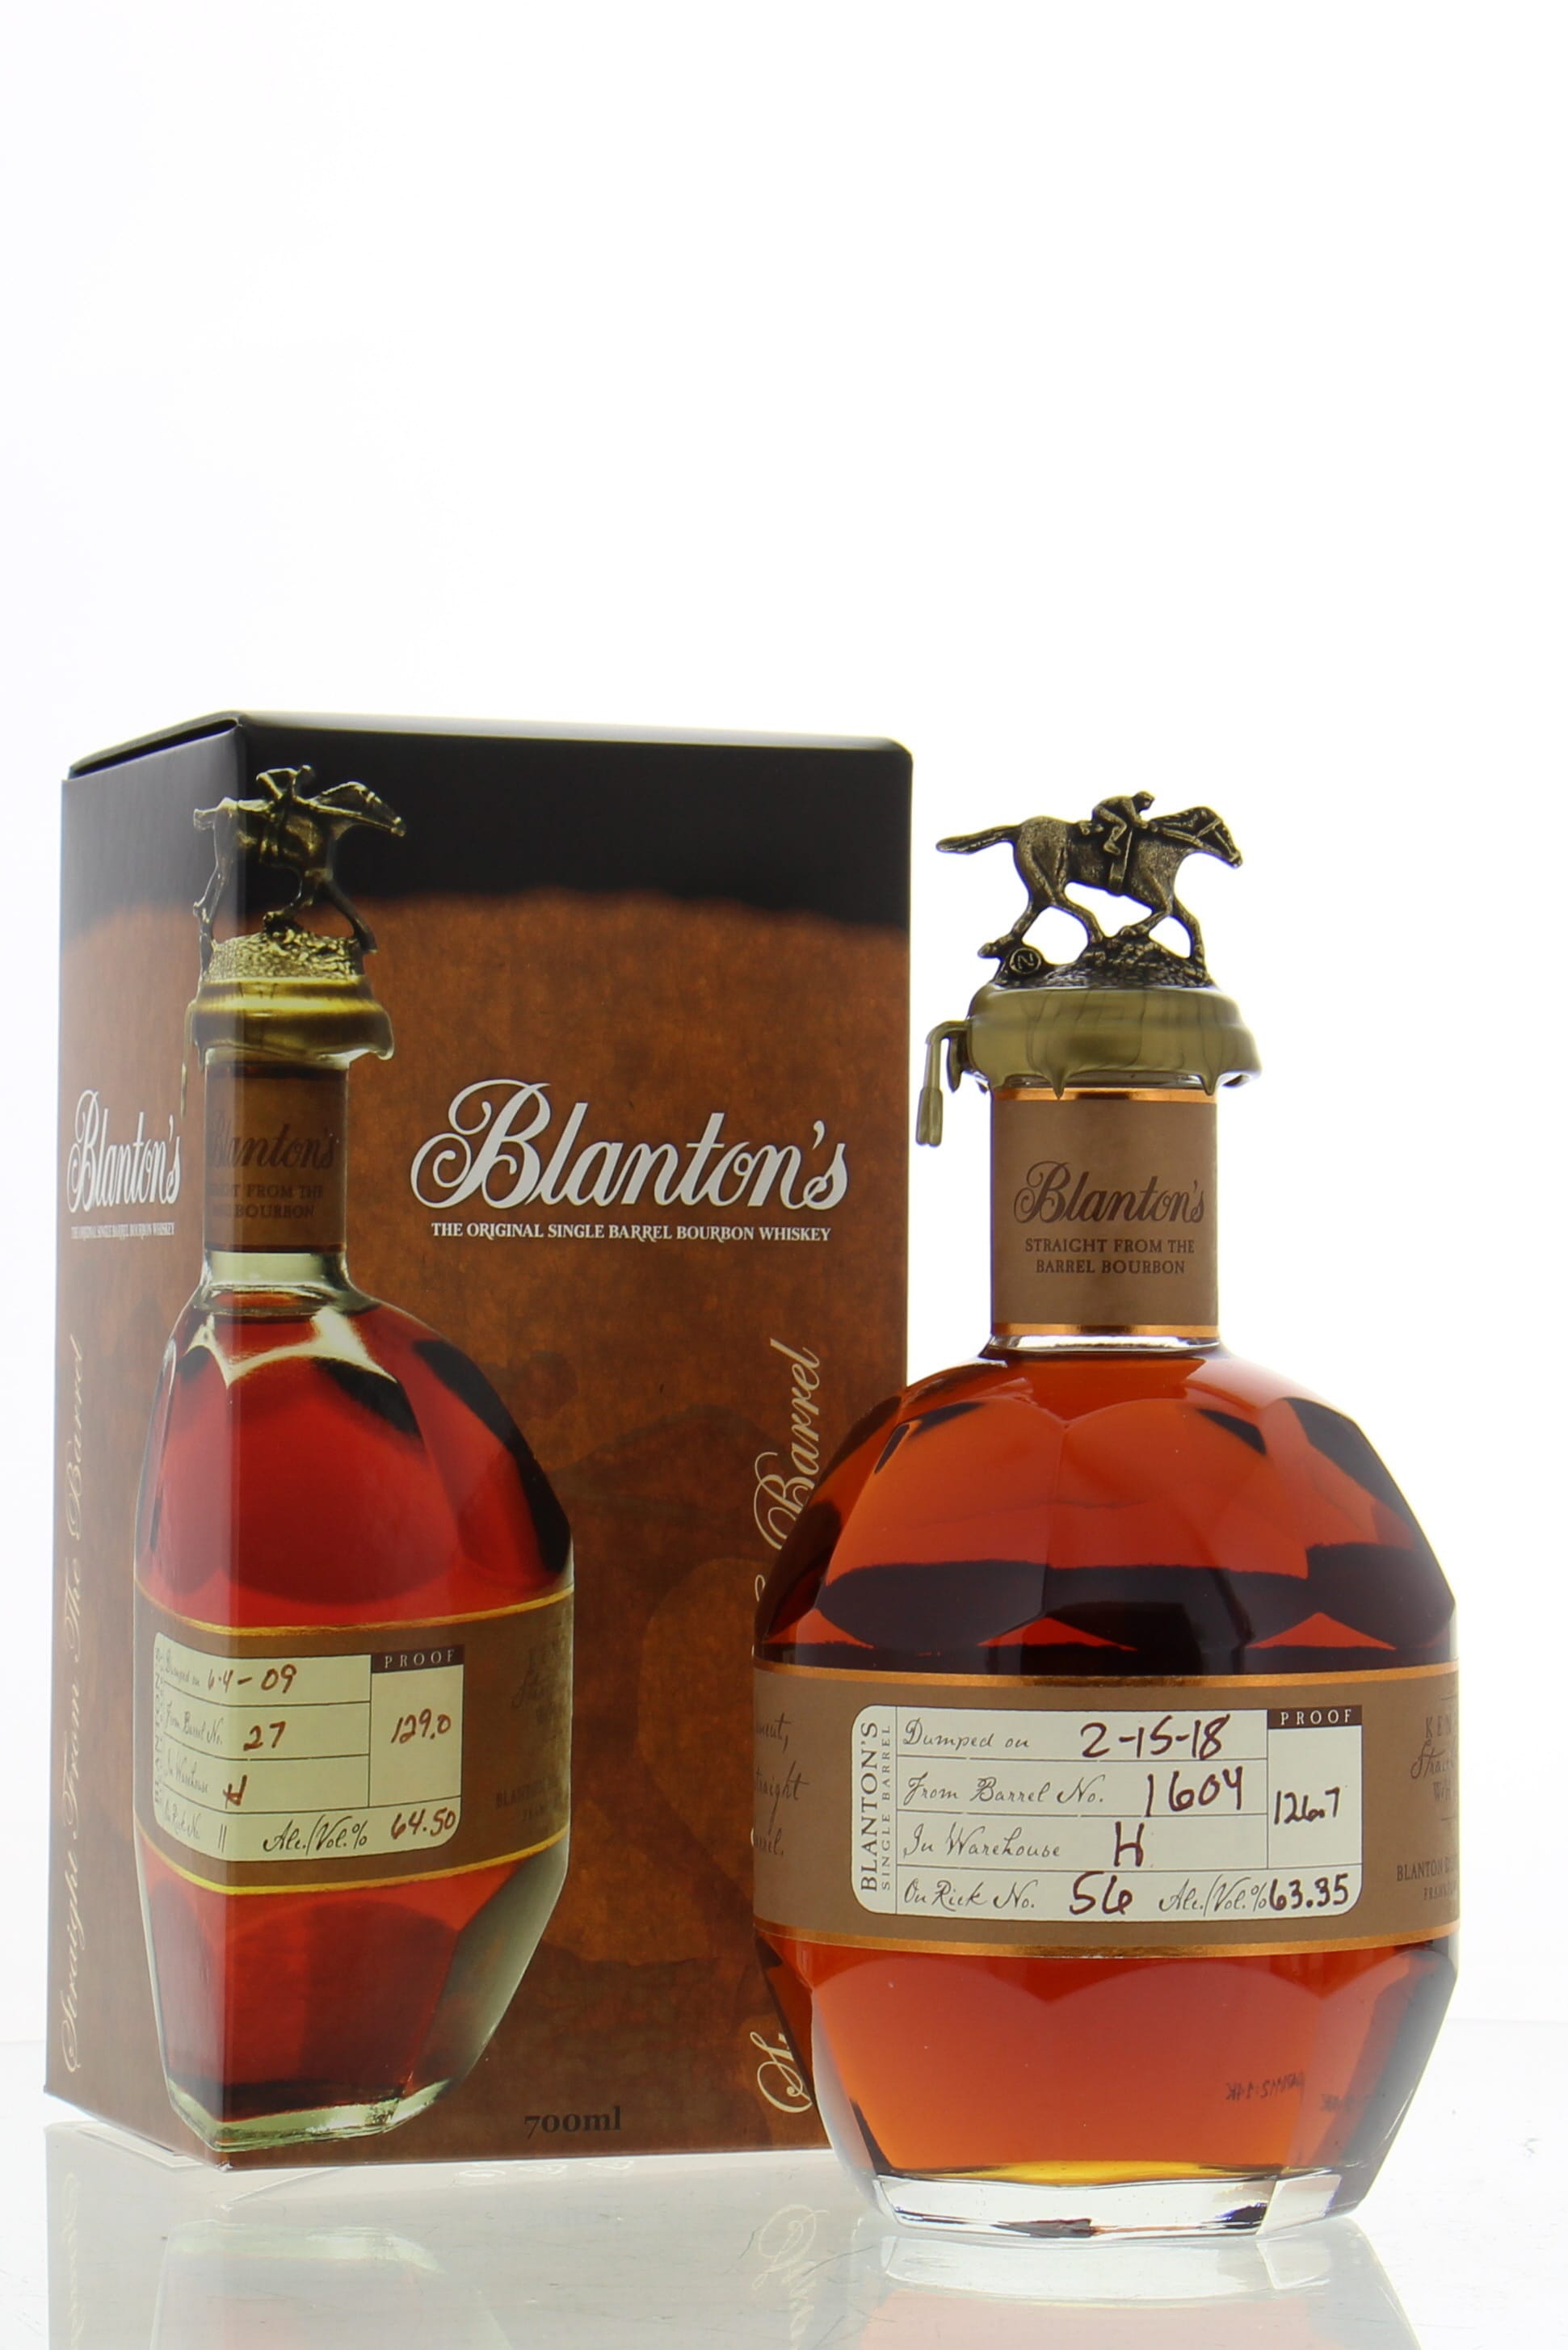 Buffalo Trace - Blanton's Straight from the Barrel Cask 1605 63.65% NV In Original Container